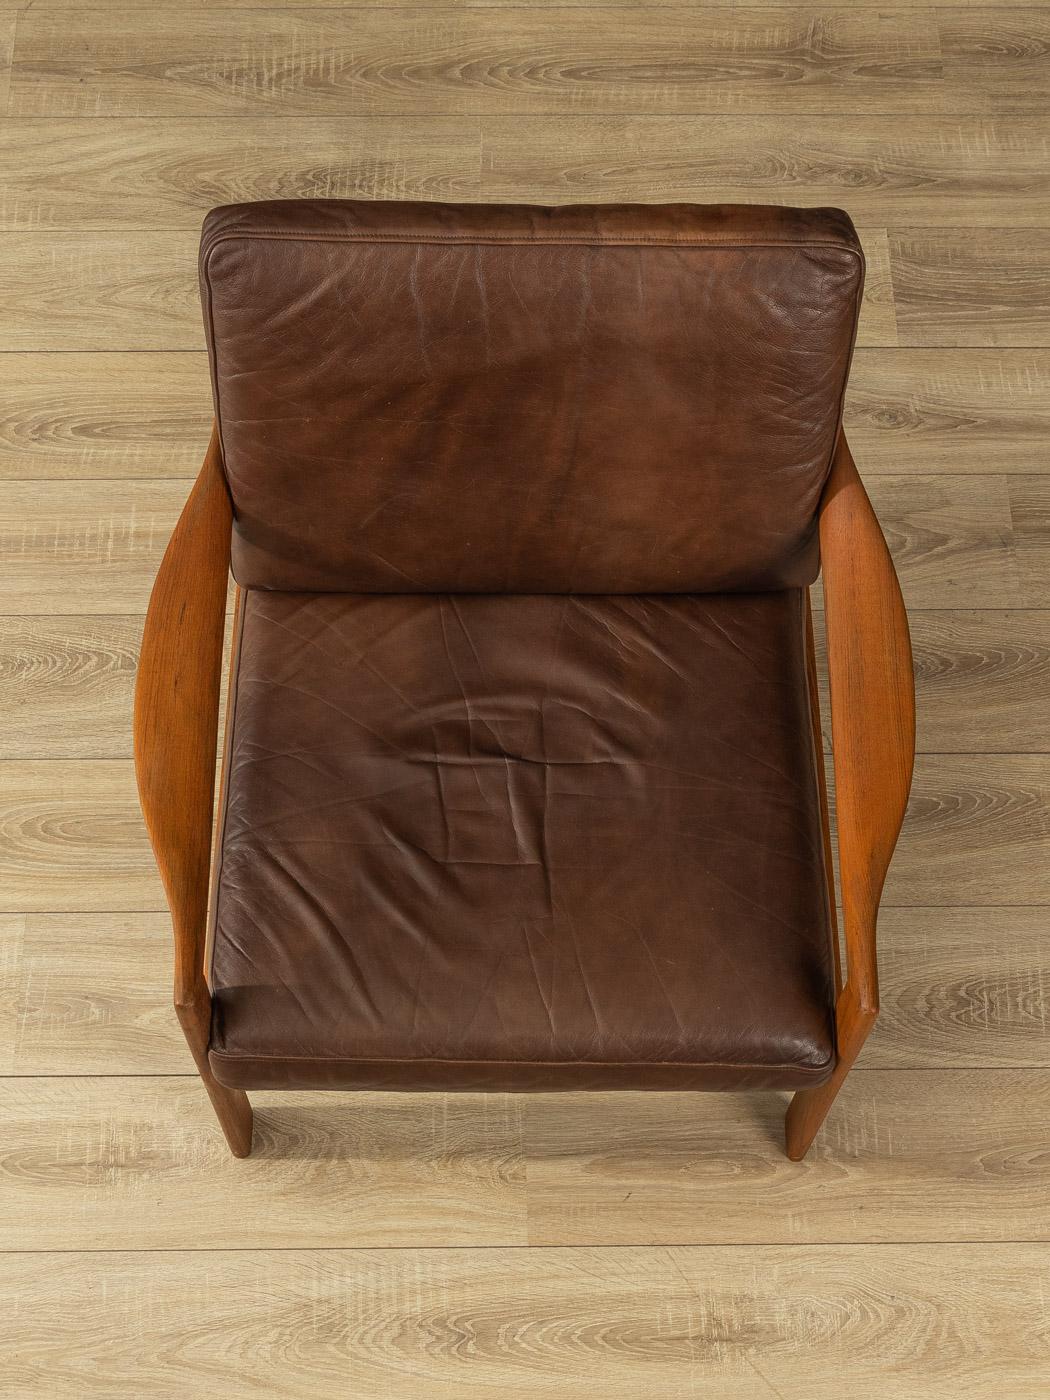 Mid-20th Century Armchair from the 1960s Designed by Illum Wikkelsø, Made in Denmark For Sale